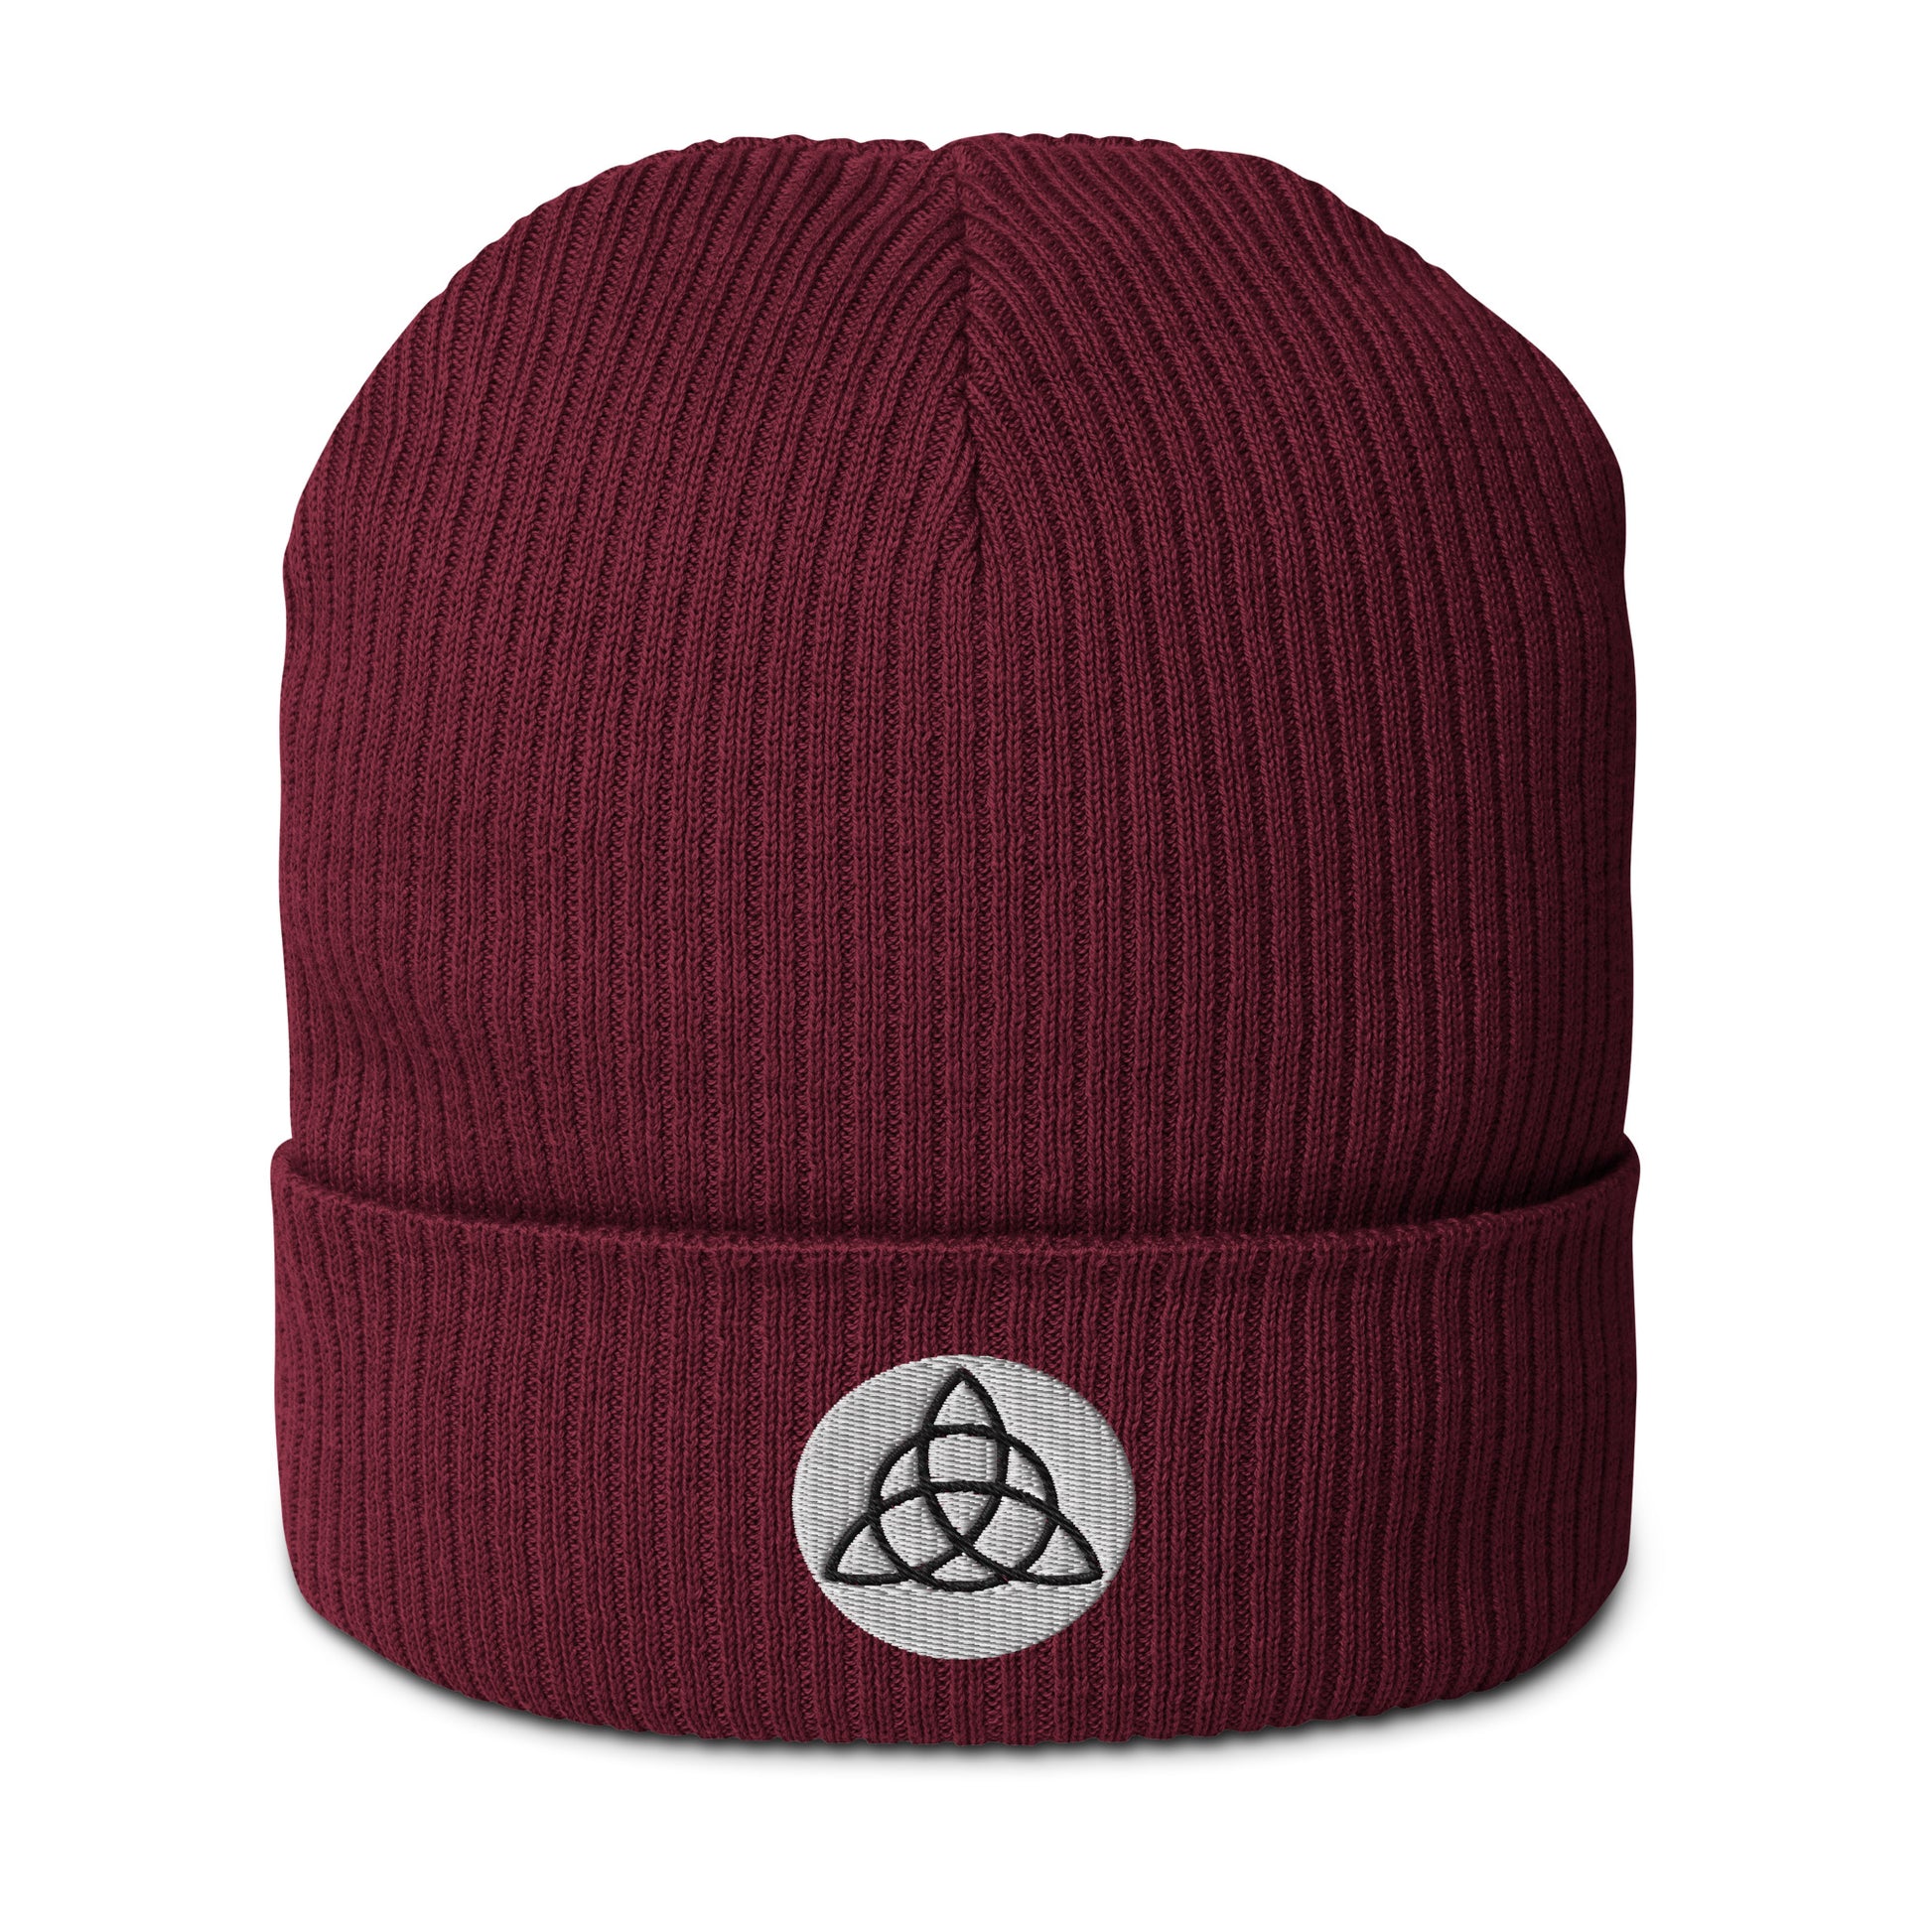 A ribbed beanie in Wine Red hat made of organic cotton, embroidered with a Triquetra symbol, symbolizing unity, eternity, and the interconnectedness of mind, body, and spirit. This organic ribbed beanie is chic, versatile, and environmentally conscious, making it an essential addition to your hat collection. Crafted from breathable lightweight fabric, it's suitable for both indoor and outdoor wear. Made with hypoallergenic and natural materials. 